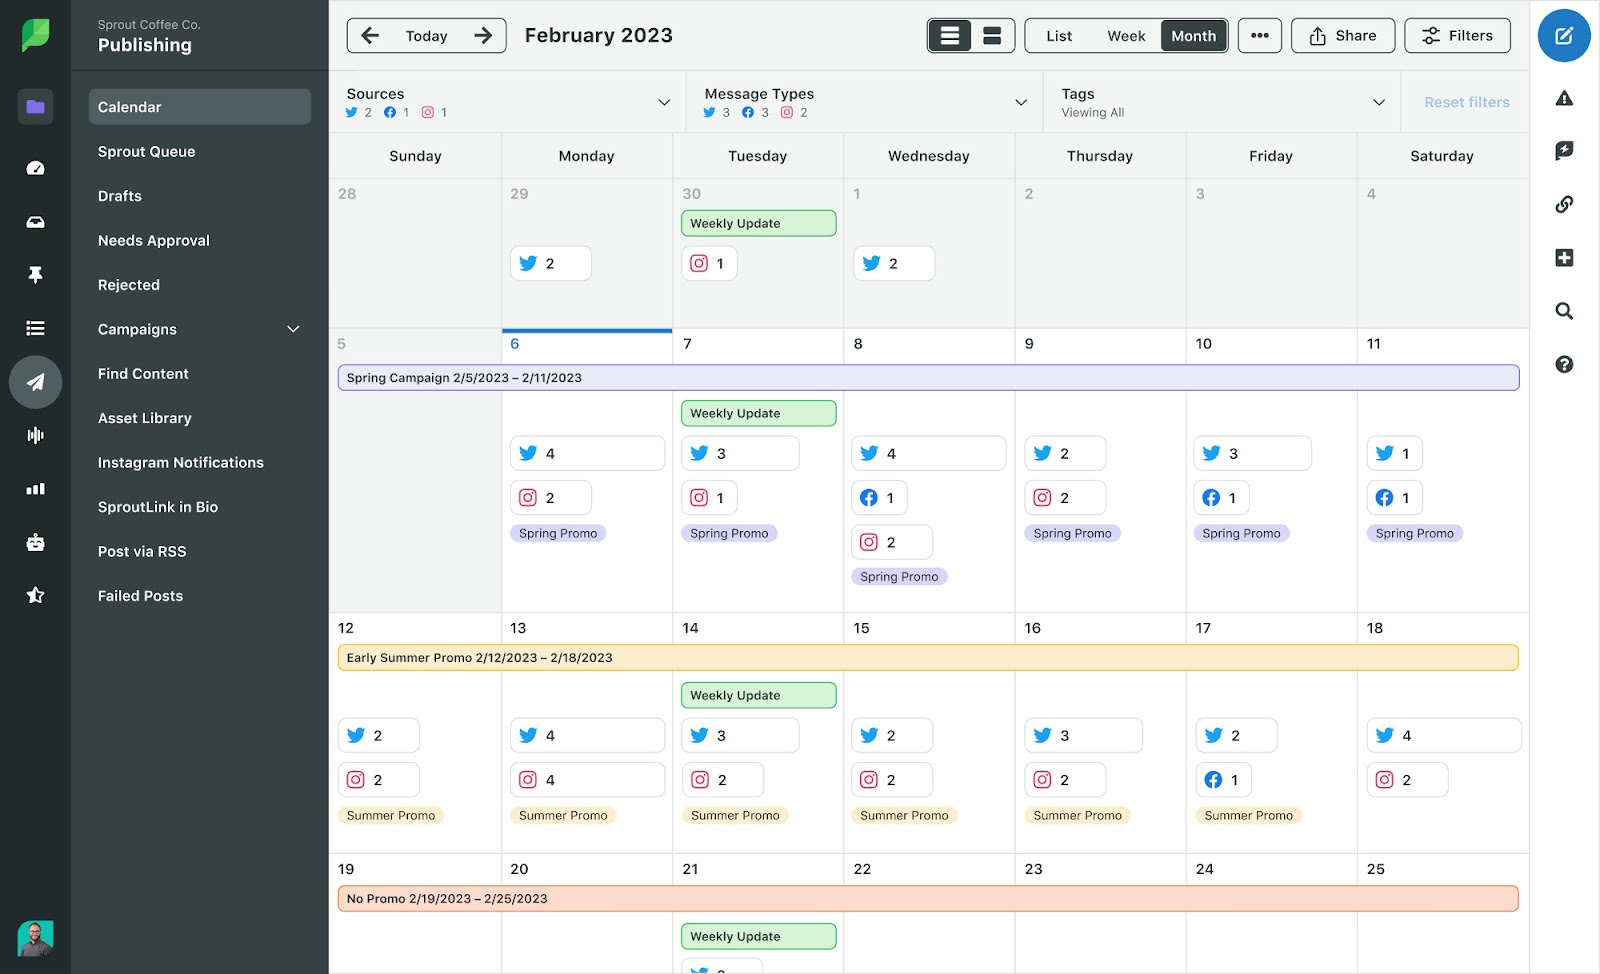 Sprout Social's content calendar with different posts scheduled for Twitter, Facebook, and Instagram.